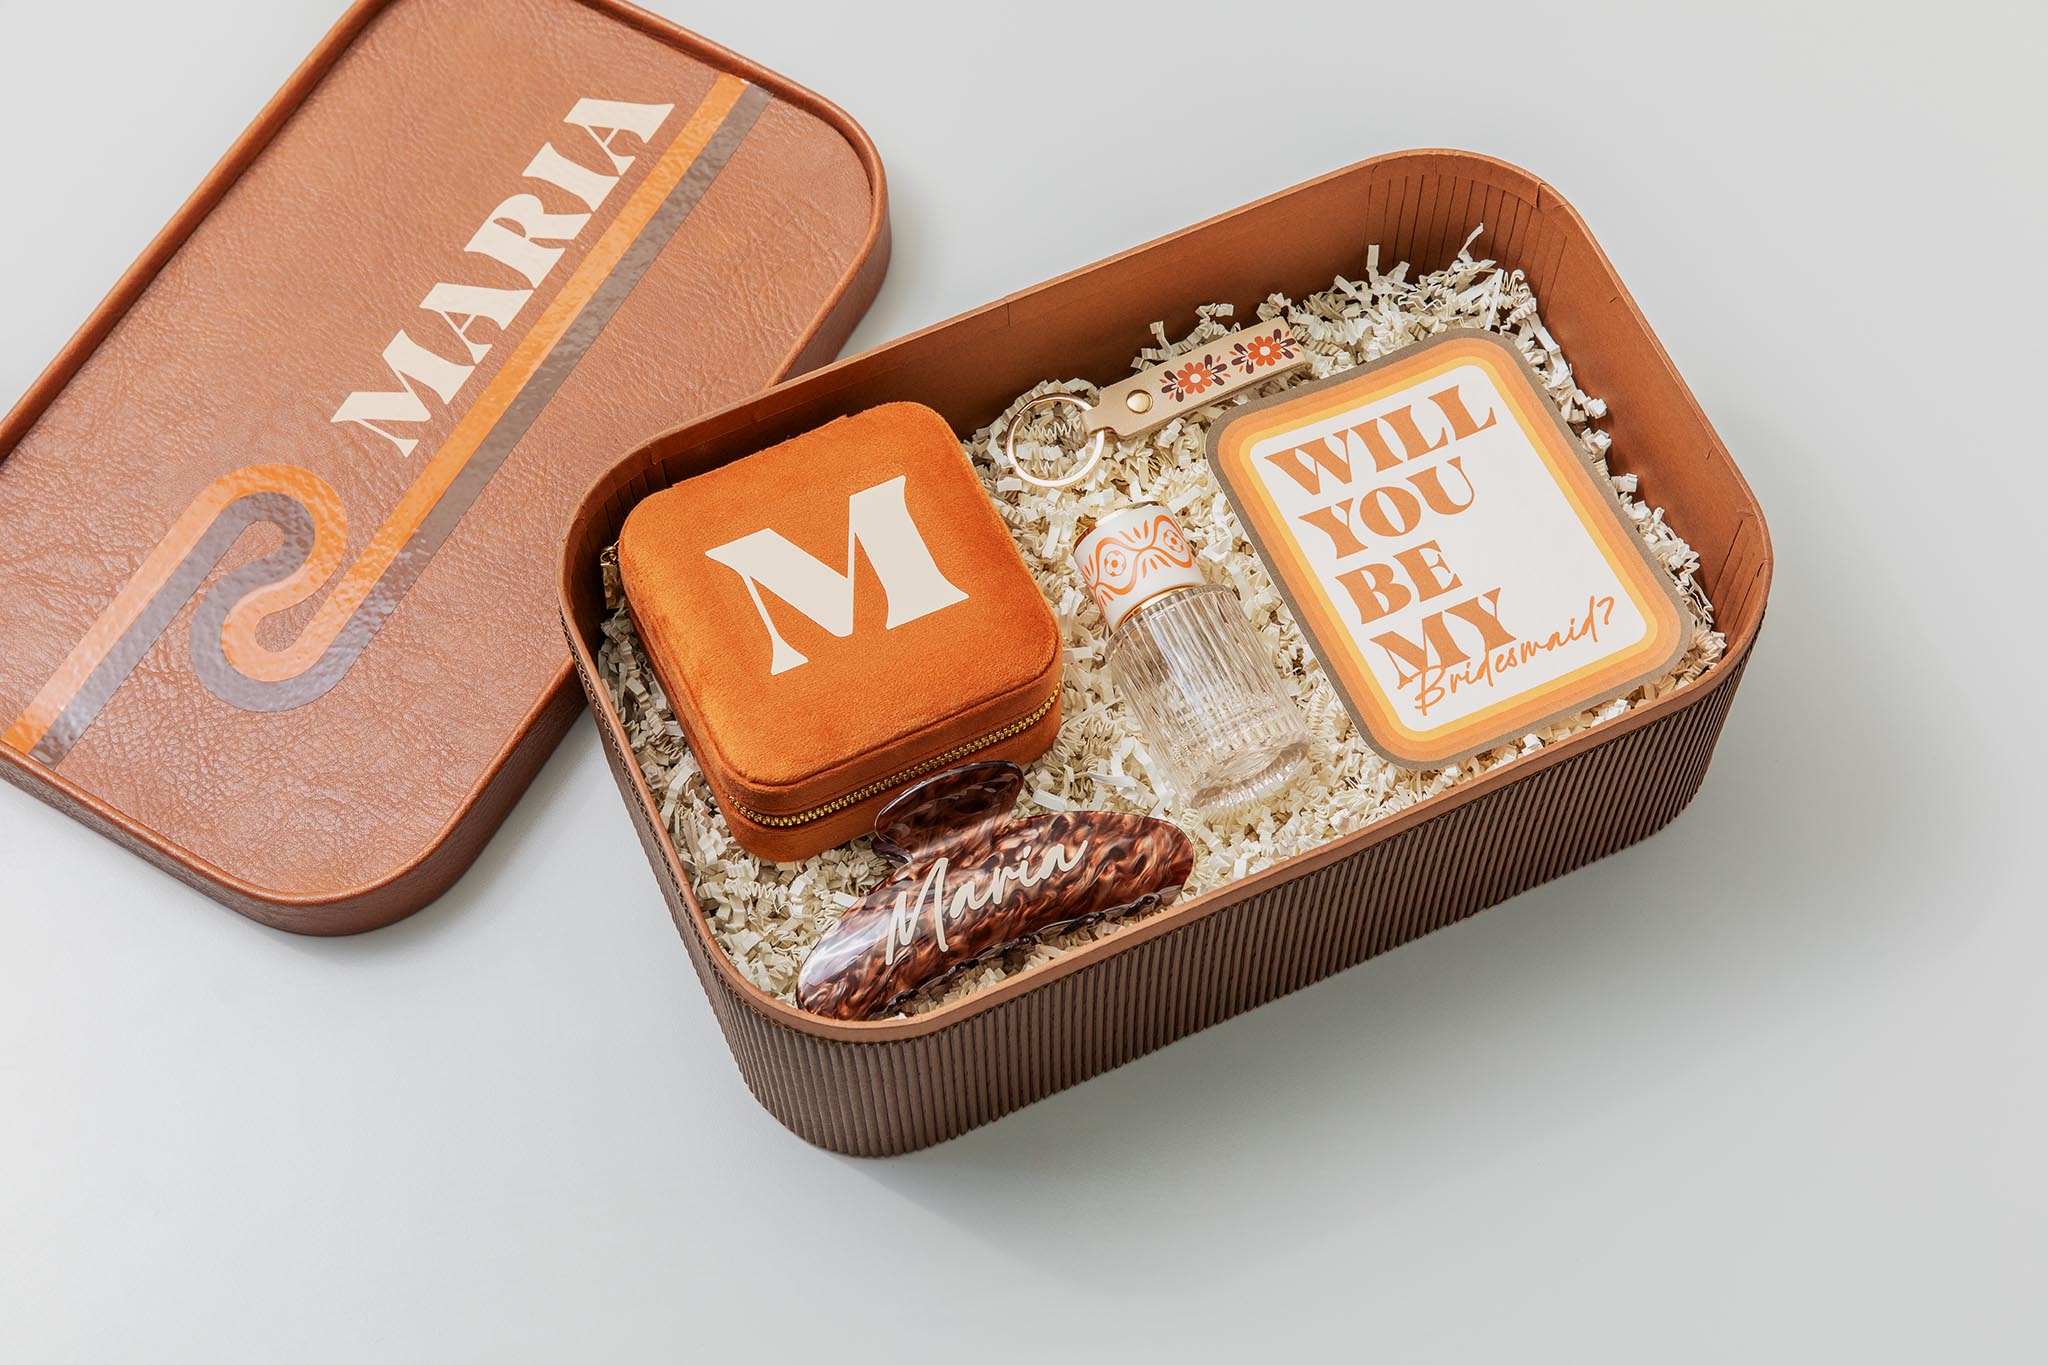 Groovy retro 70s bridesmaid proposal box made with Cricut